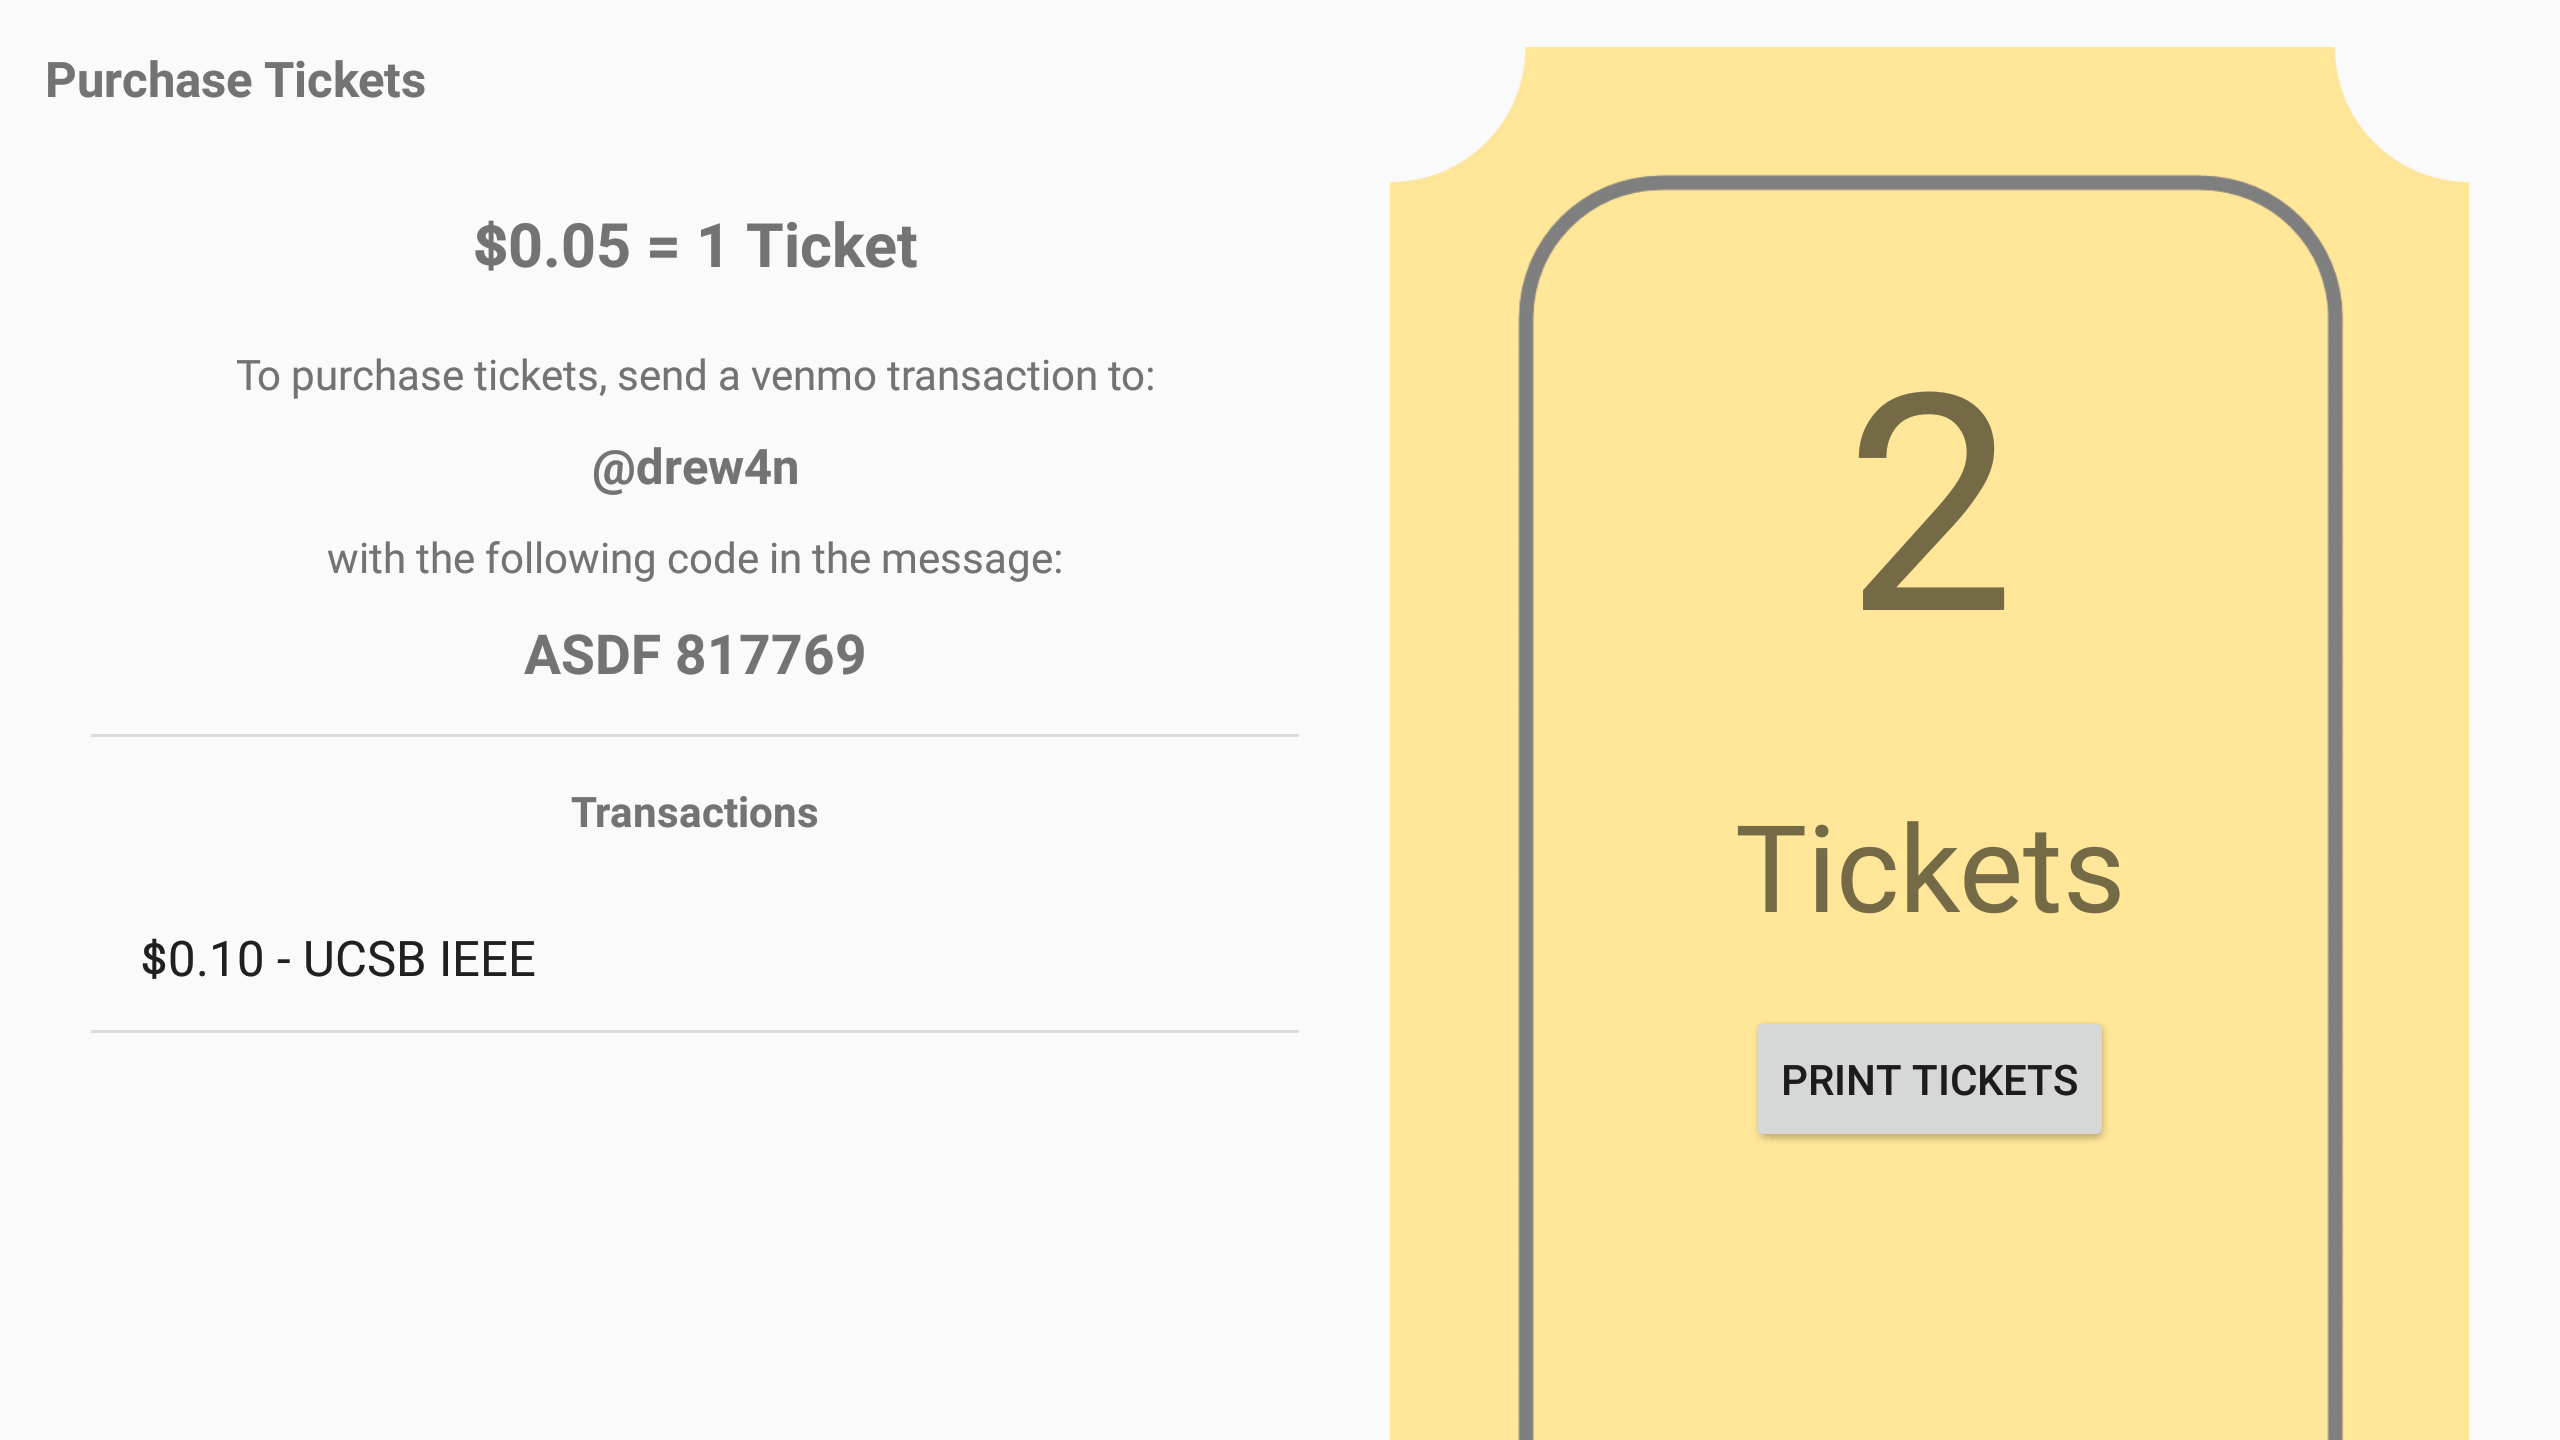 Purchase Tickets Screen